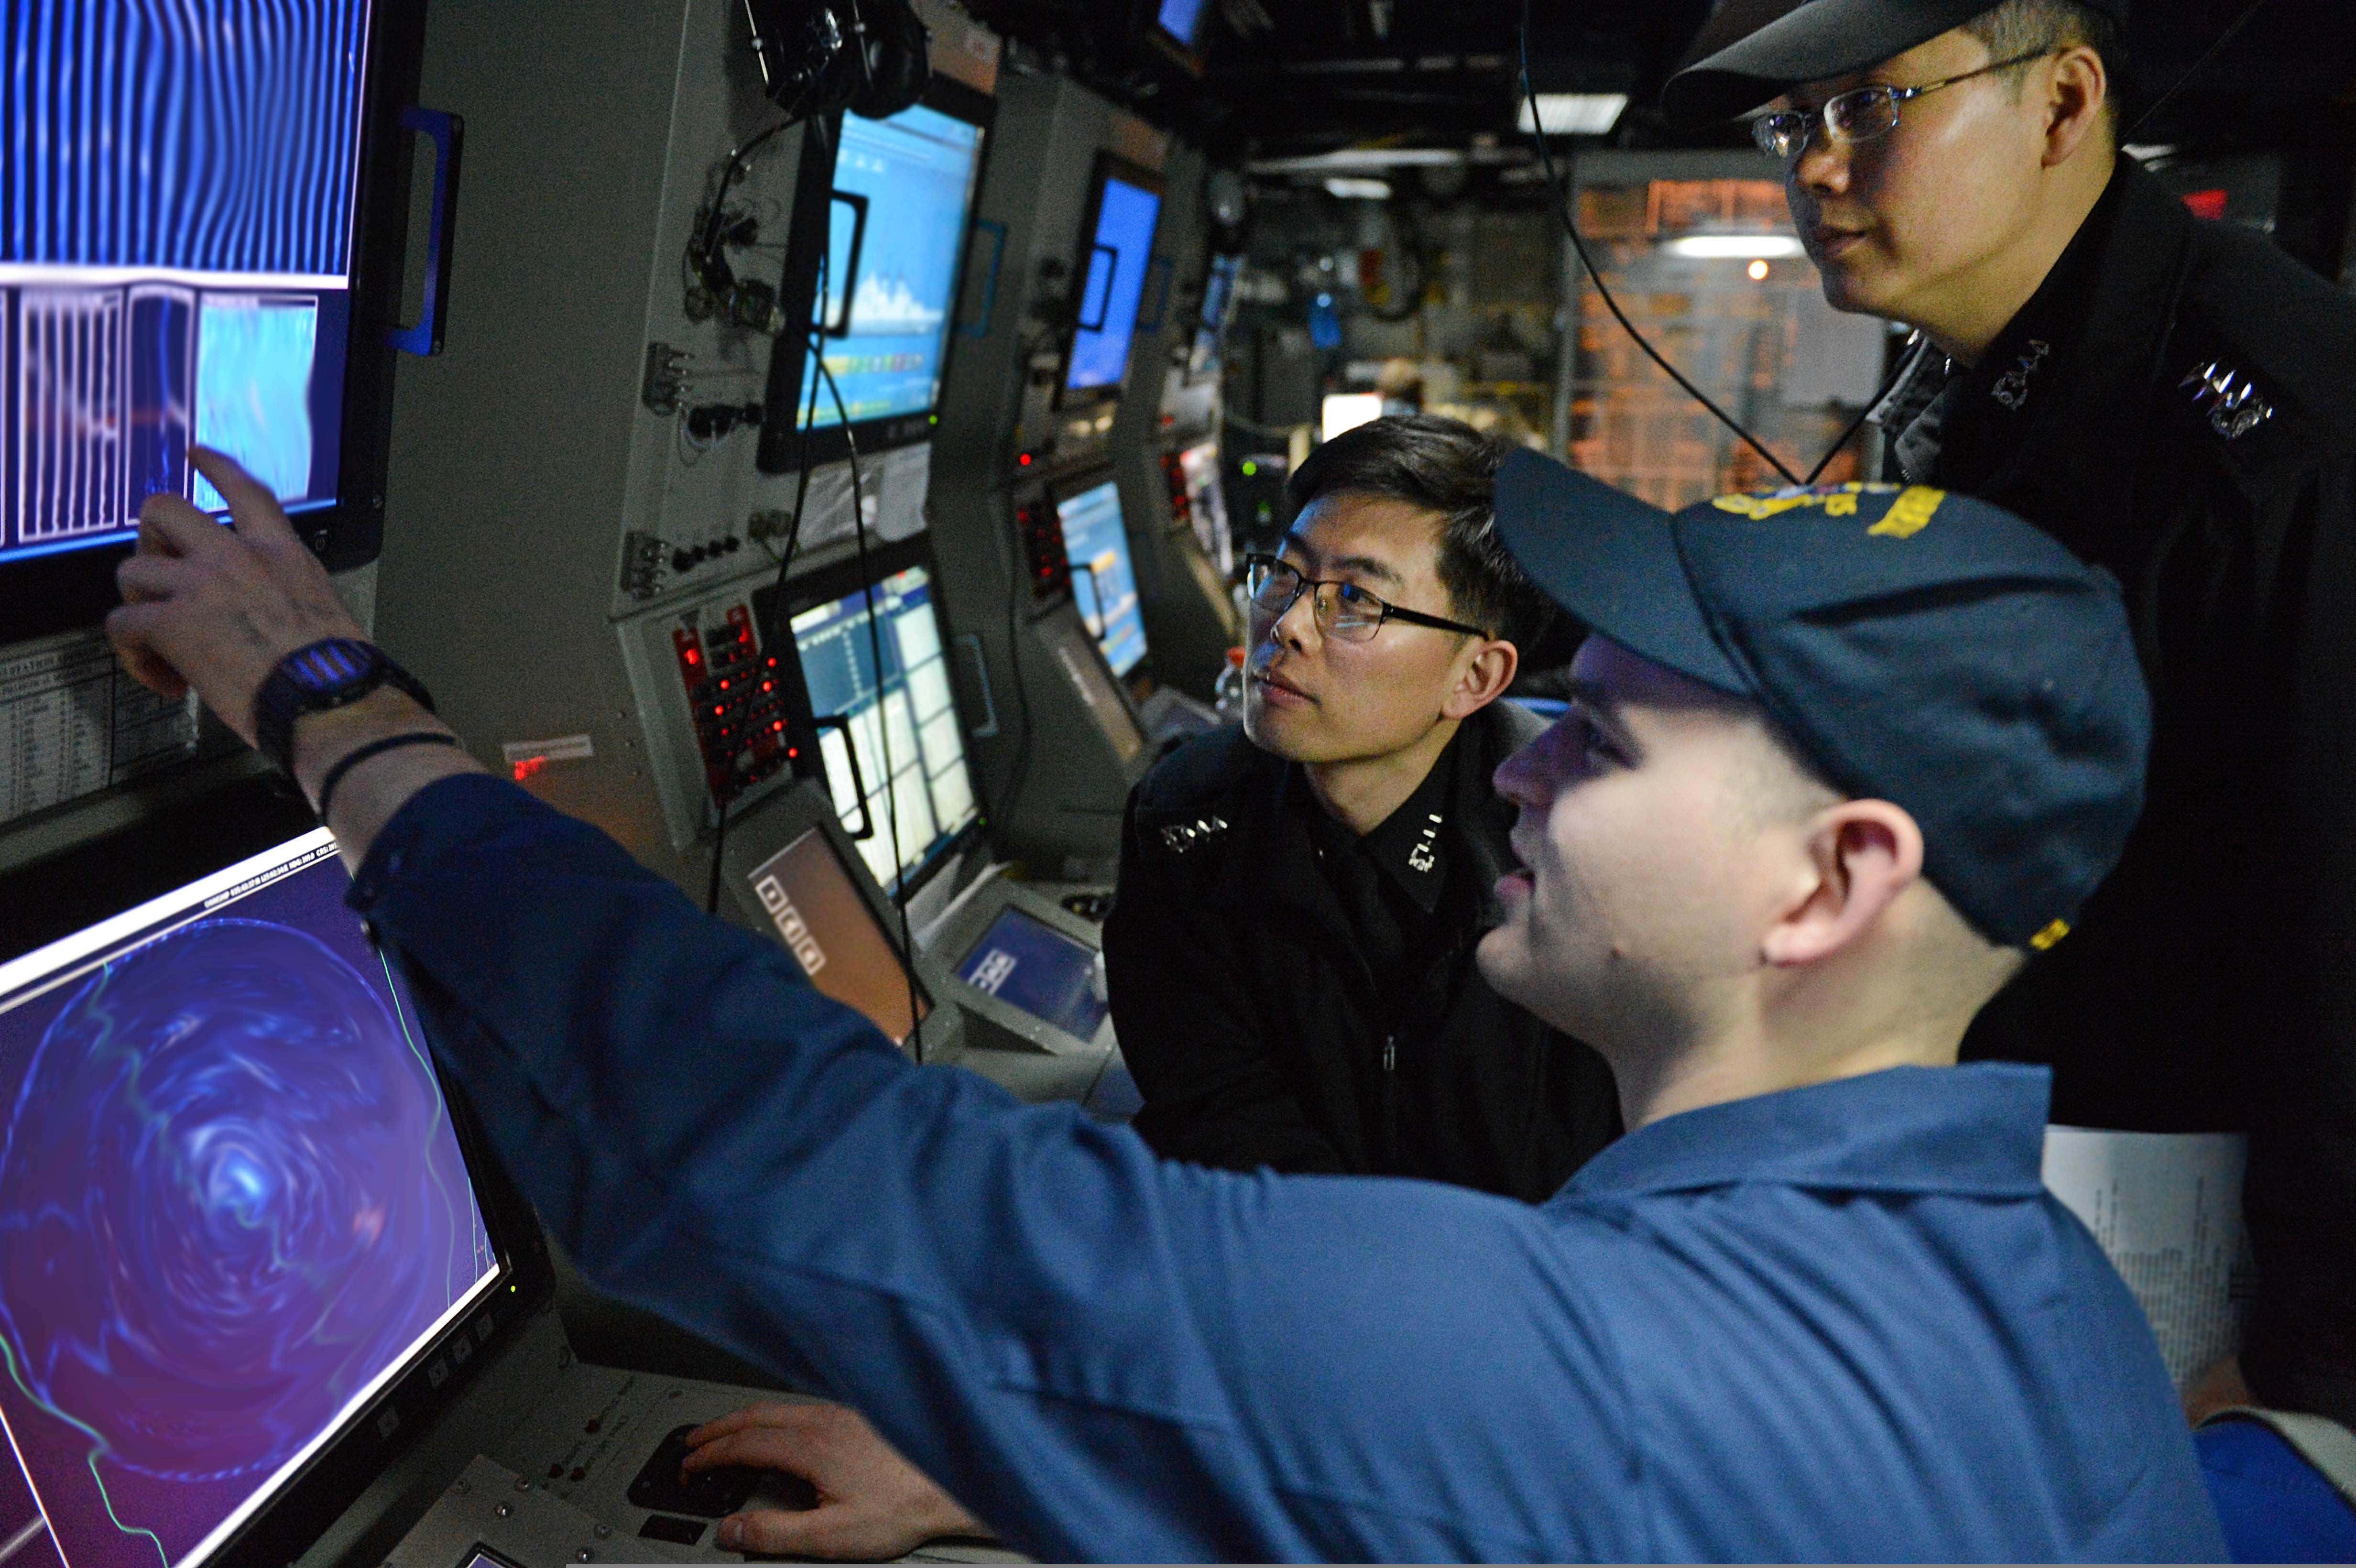 message-editor%2F1601969684110-u.s._navy_sonar_technician_surface_1st_class_andrew_murphy_front_works_with_south_korean_sailors_in_the_sonar_control_room_of_the_guided_missile_destroyer_uss_mccampbell_ddg_85_during_an_antisubmarine_130316-n-tg831-240.jpg